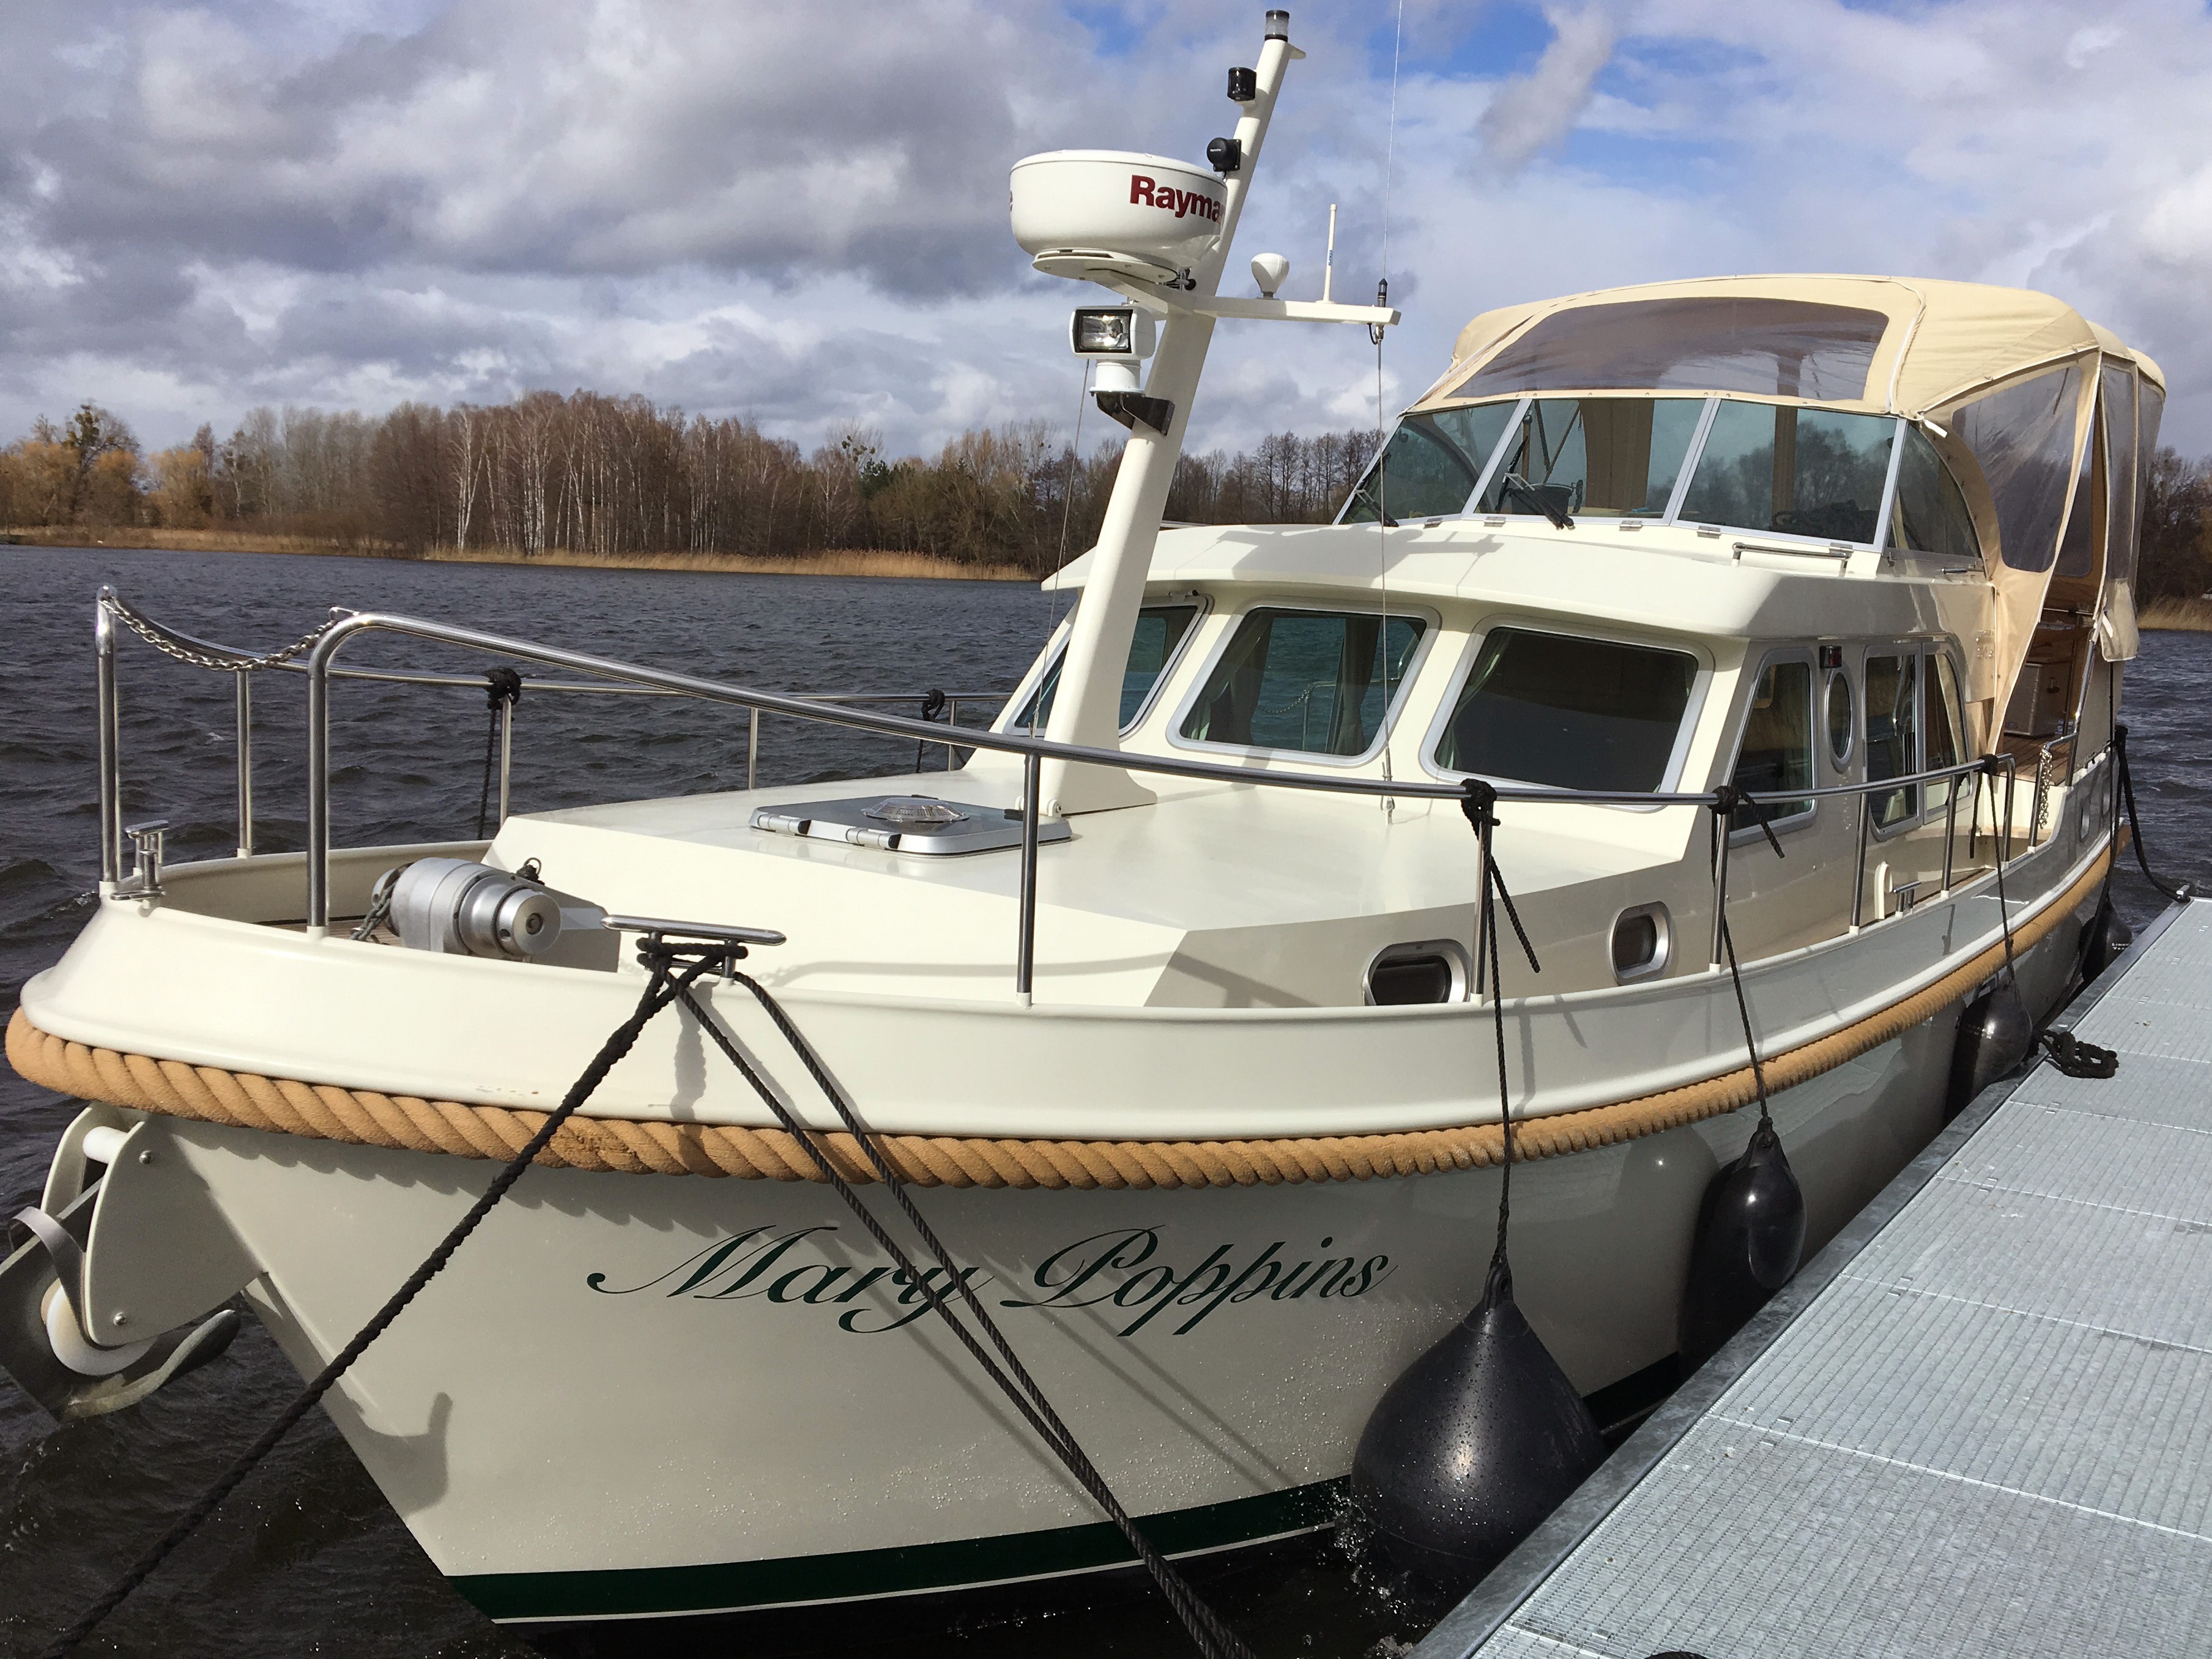 Linssen Grand Sturdy 34.9 AC - Motor Boat Charter Germany & Boat hire in Germany Werder (Havel) Marina Vulkan Werft 2